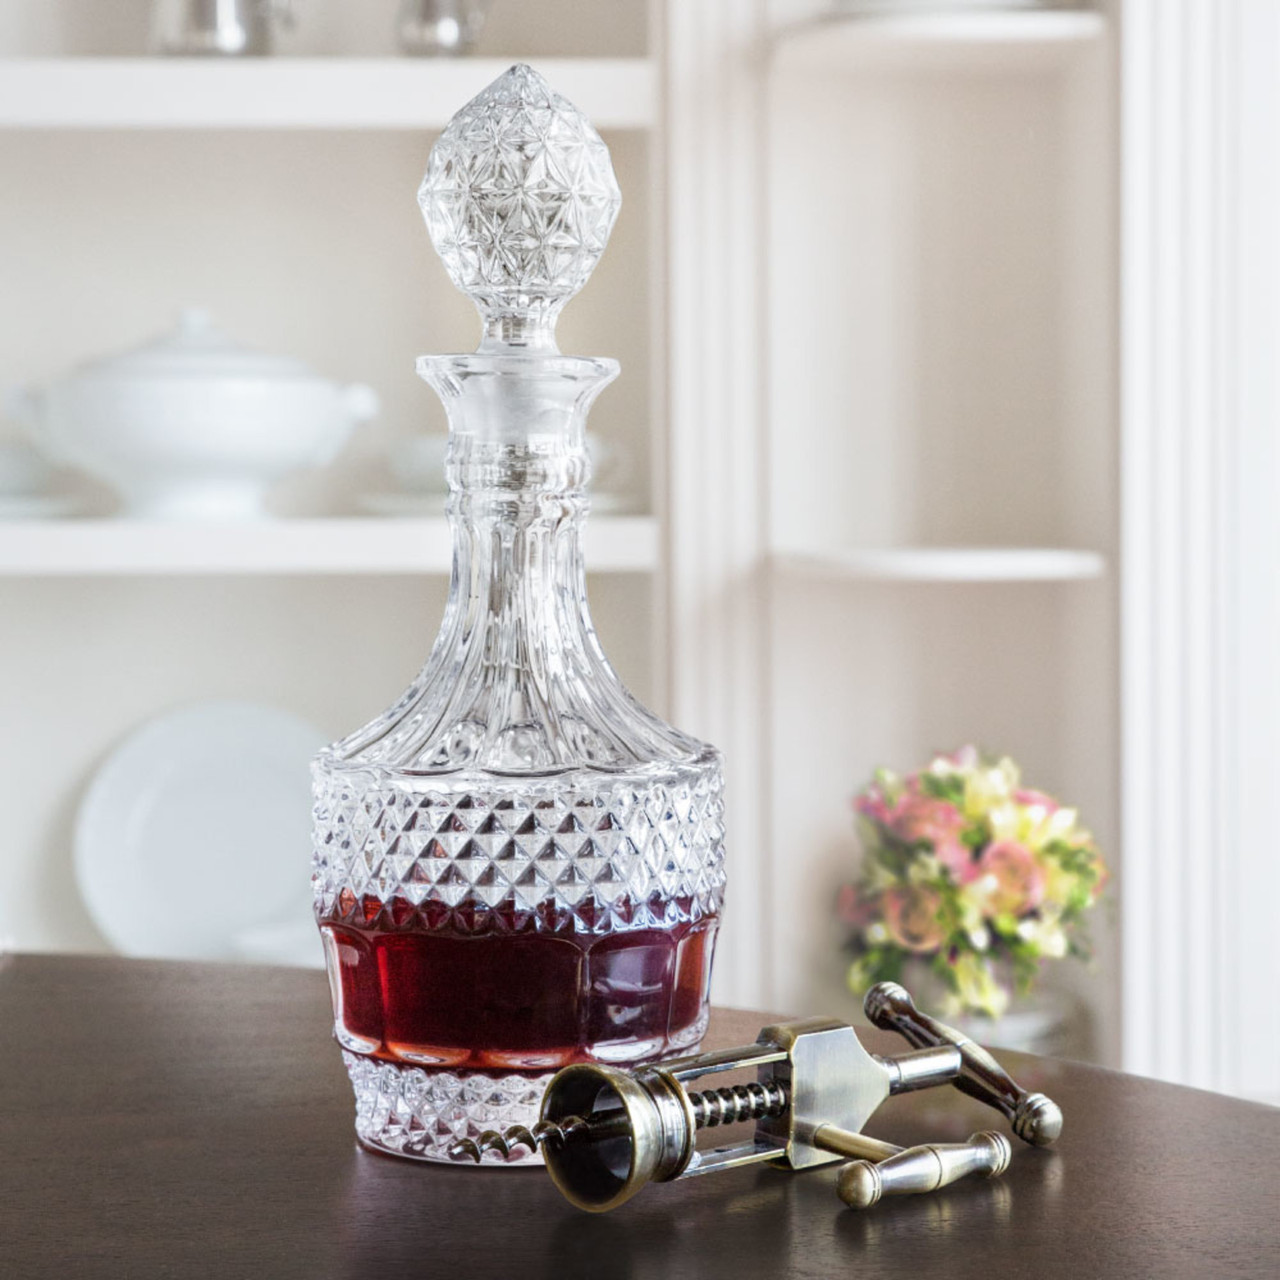 Crystal Vintage Decanter by Twine®